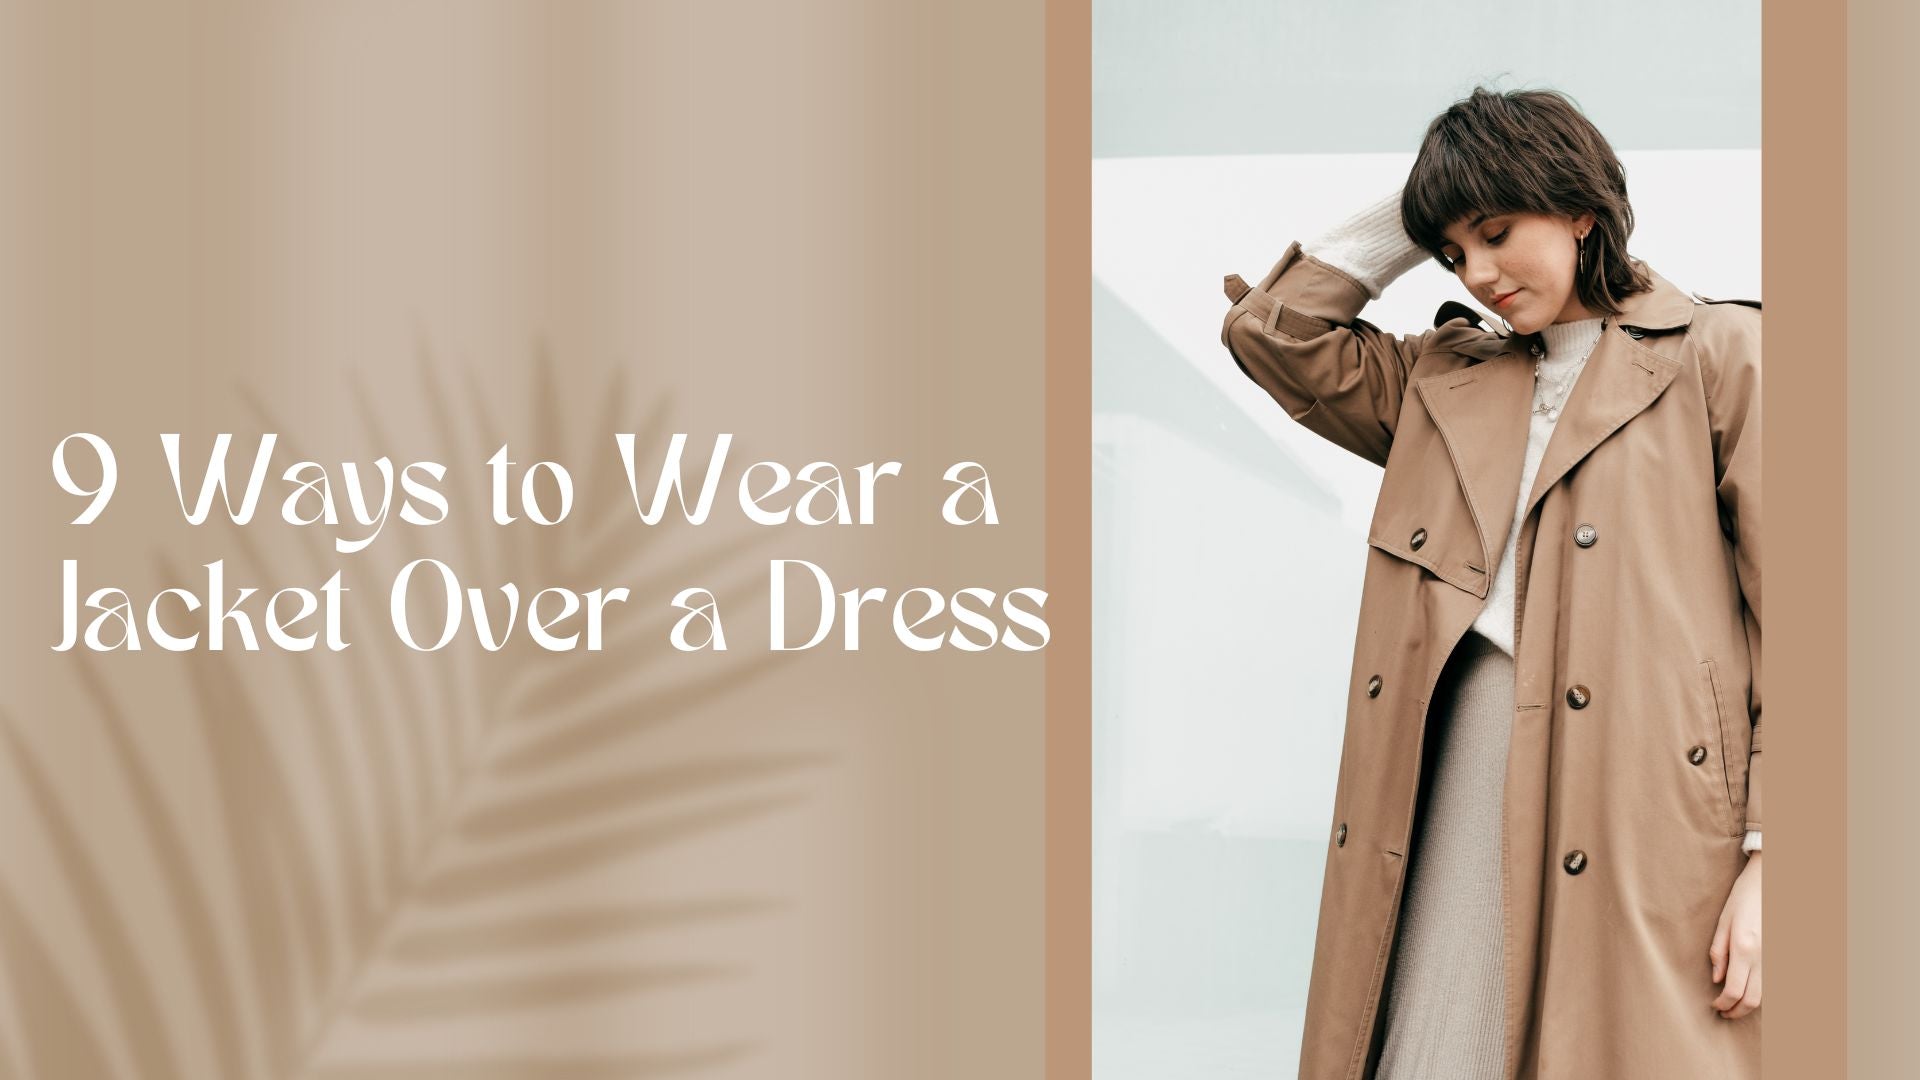 9 Ways to Wear a Jacket Over a Dress That Make the Look Your Own